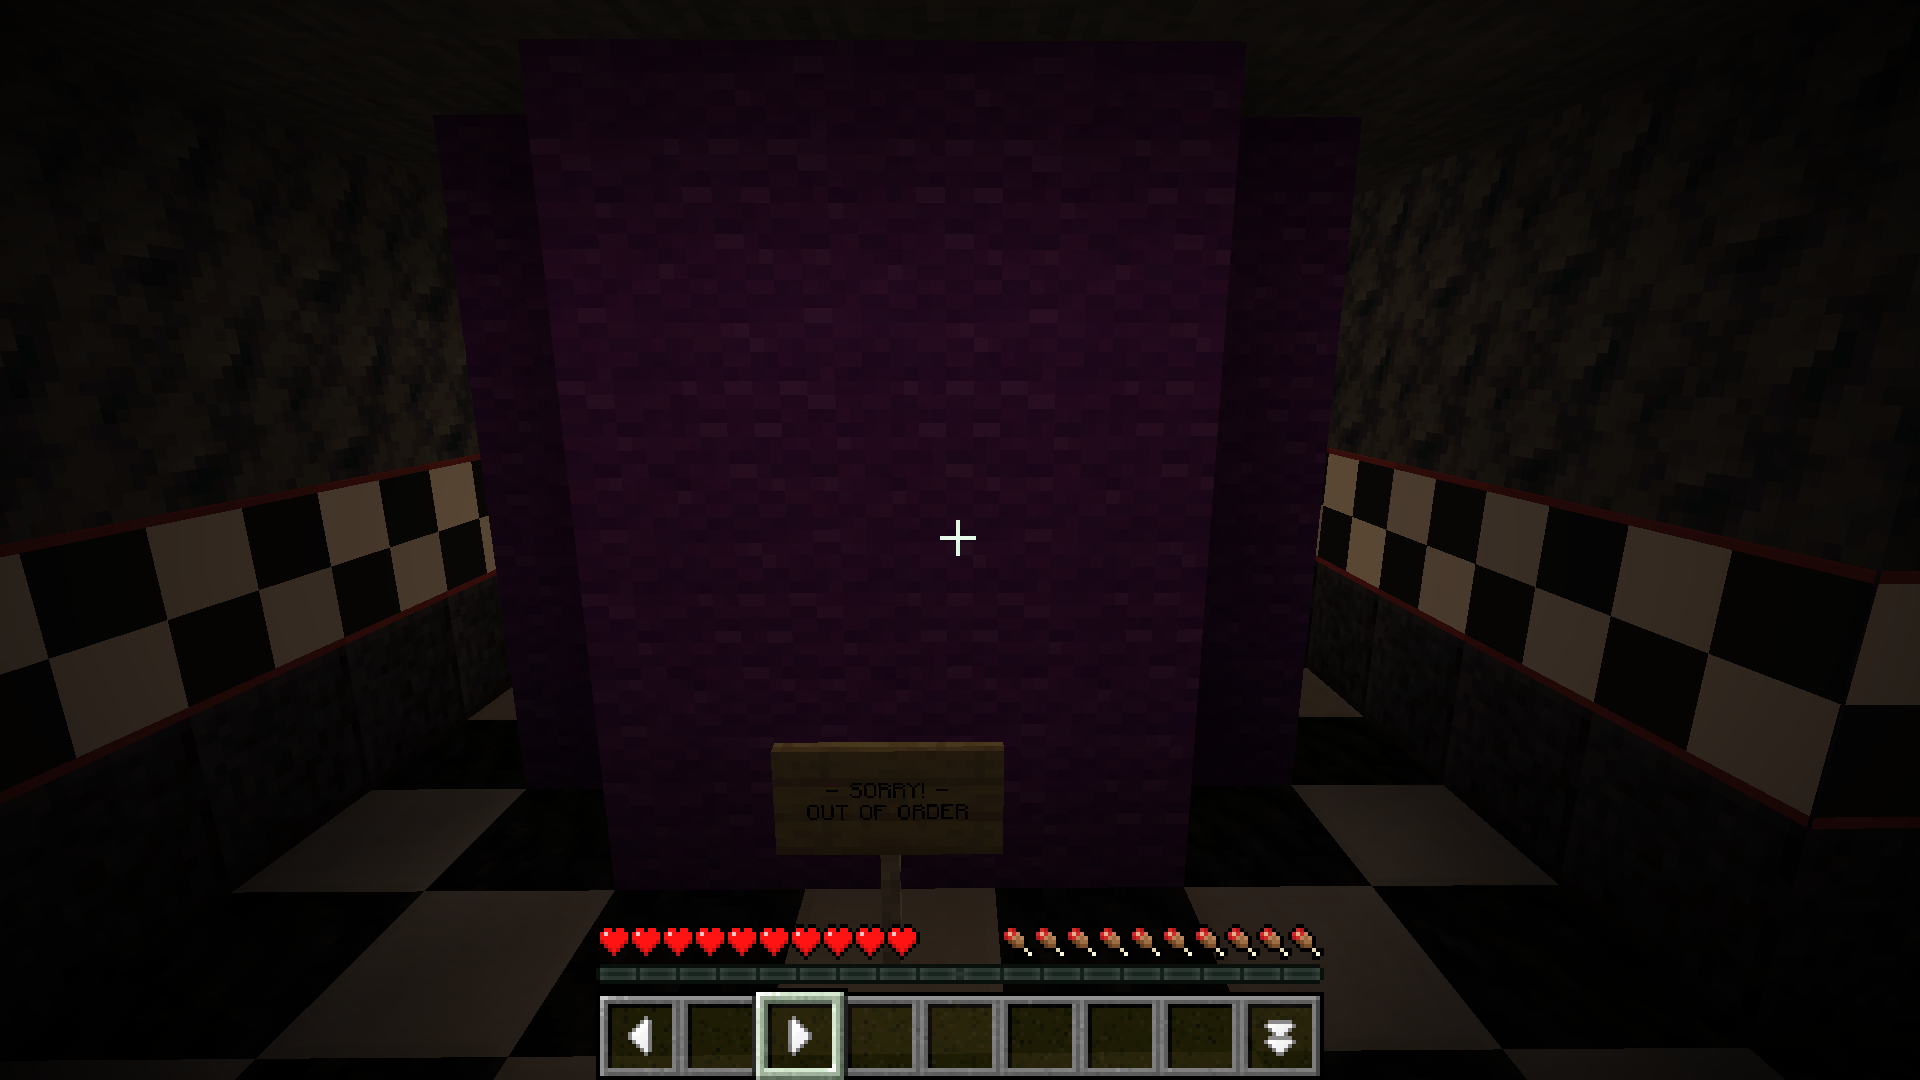 1.8.9] Five Nights At Freddy's adventure map Minecraft Map